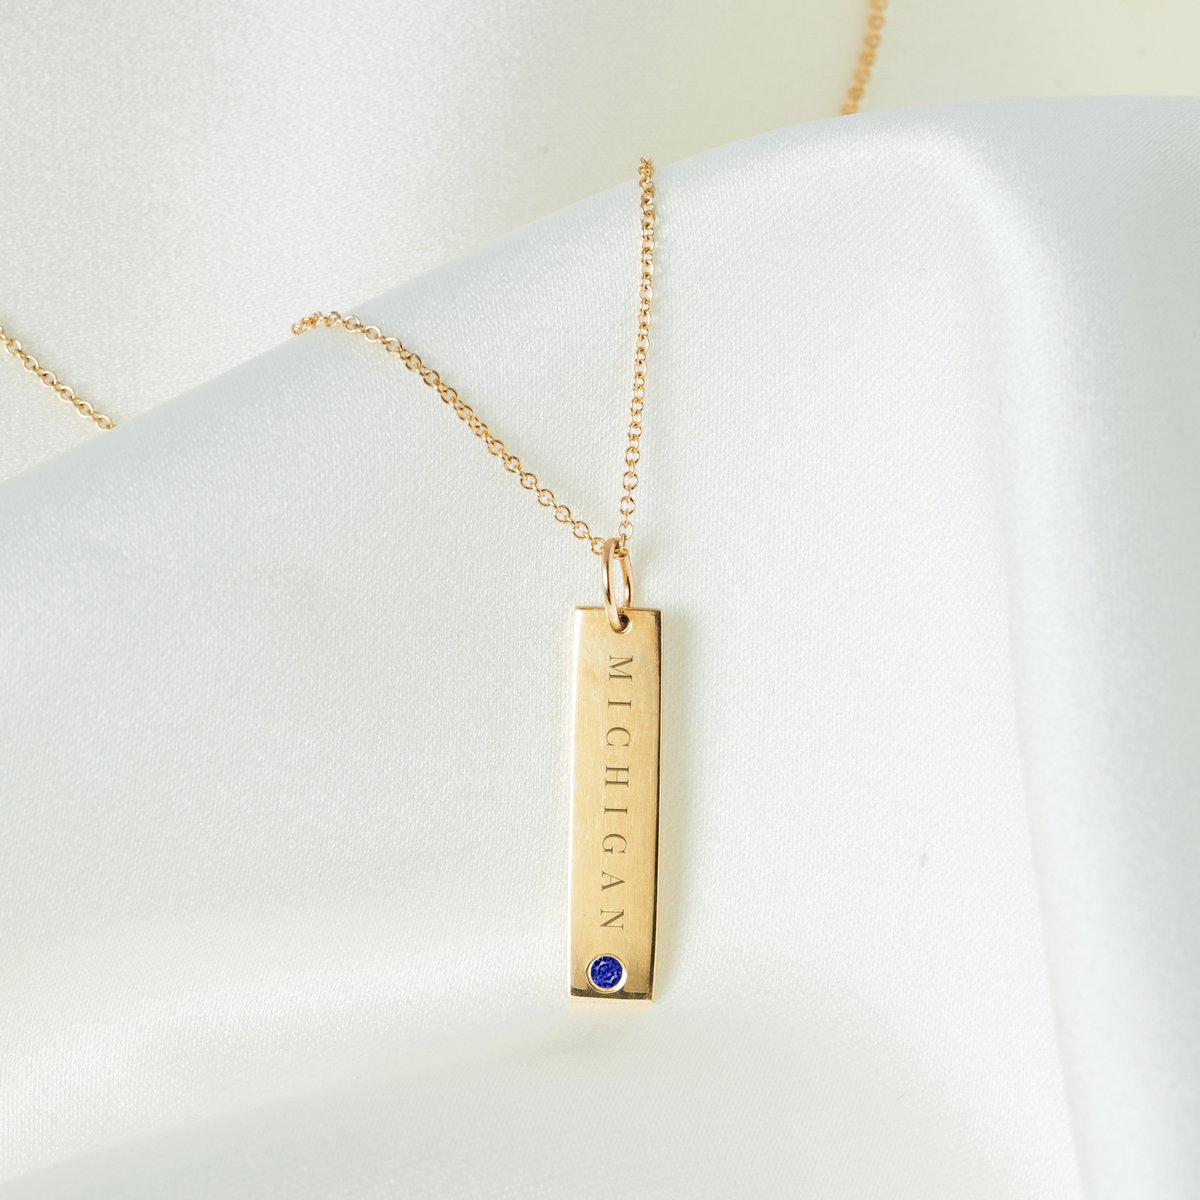 Michigan Sapphire Gemstone Bar laydown shown in gold on cable chain